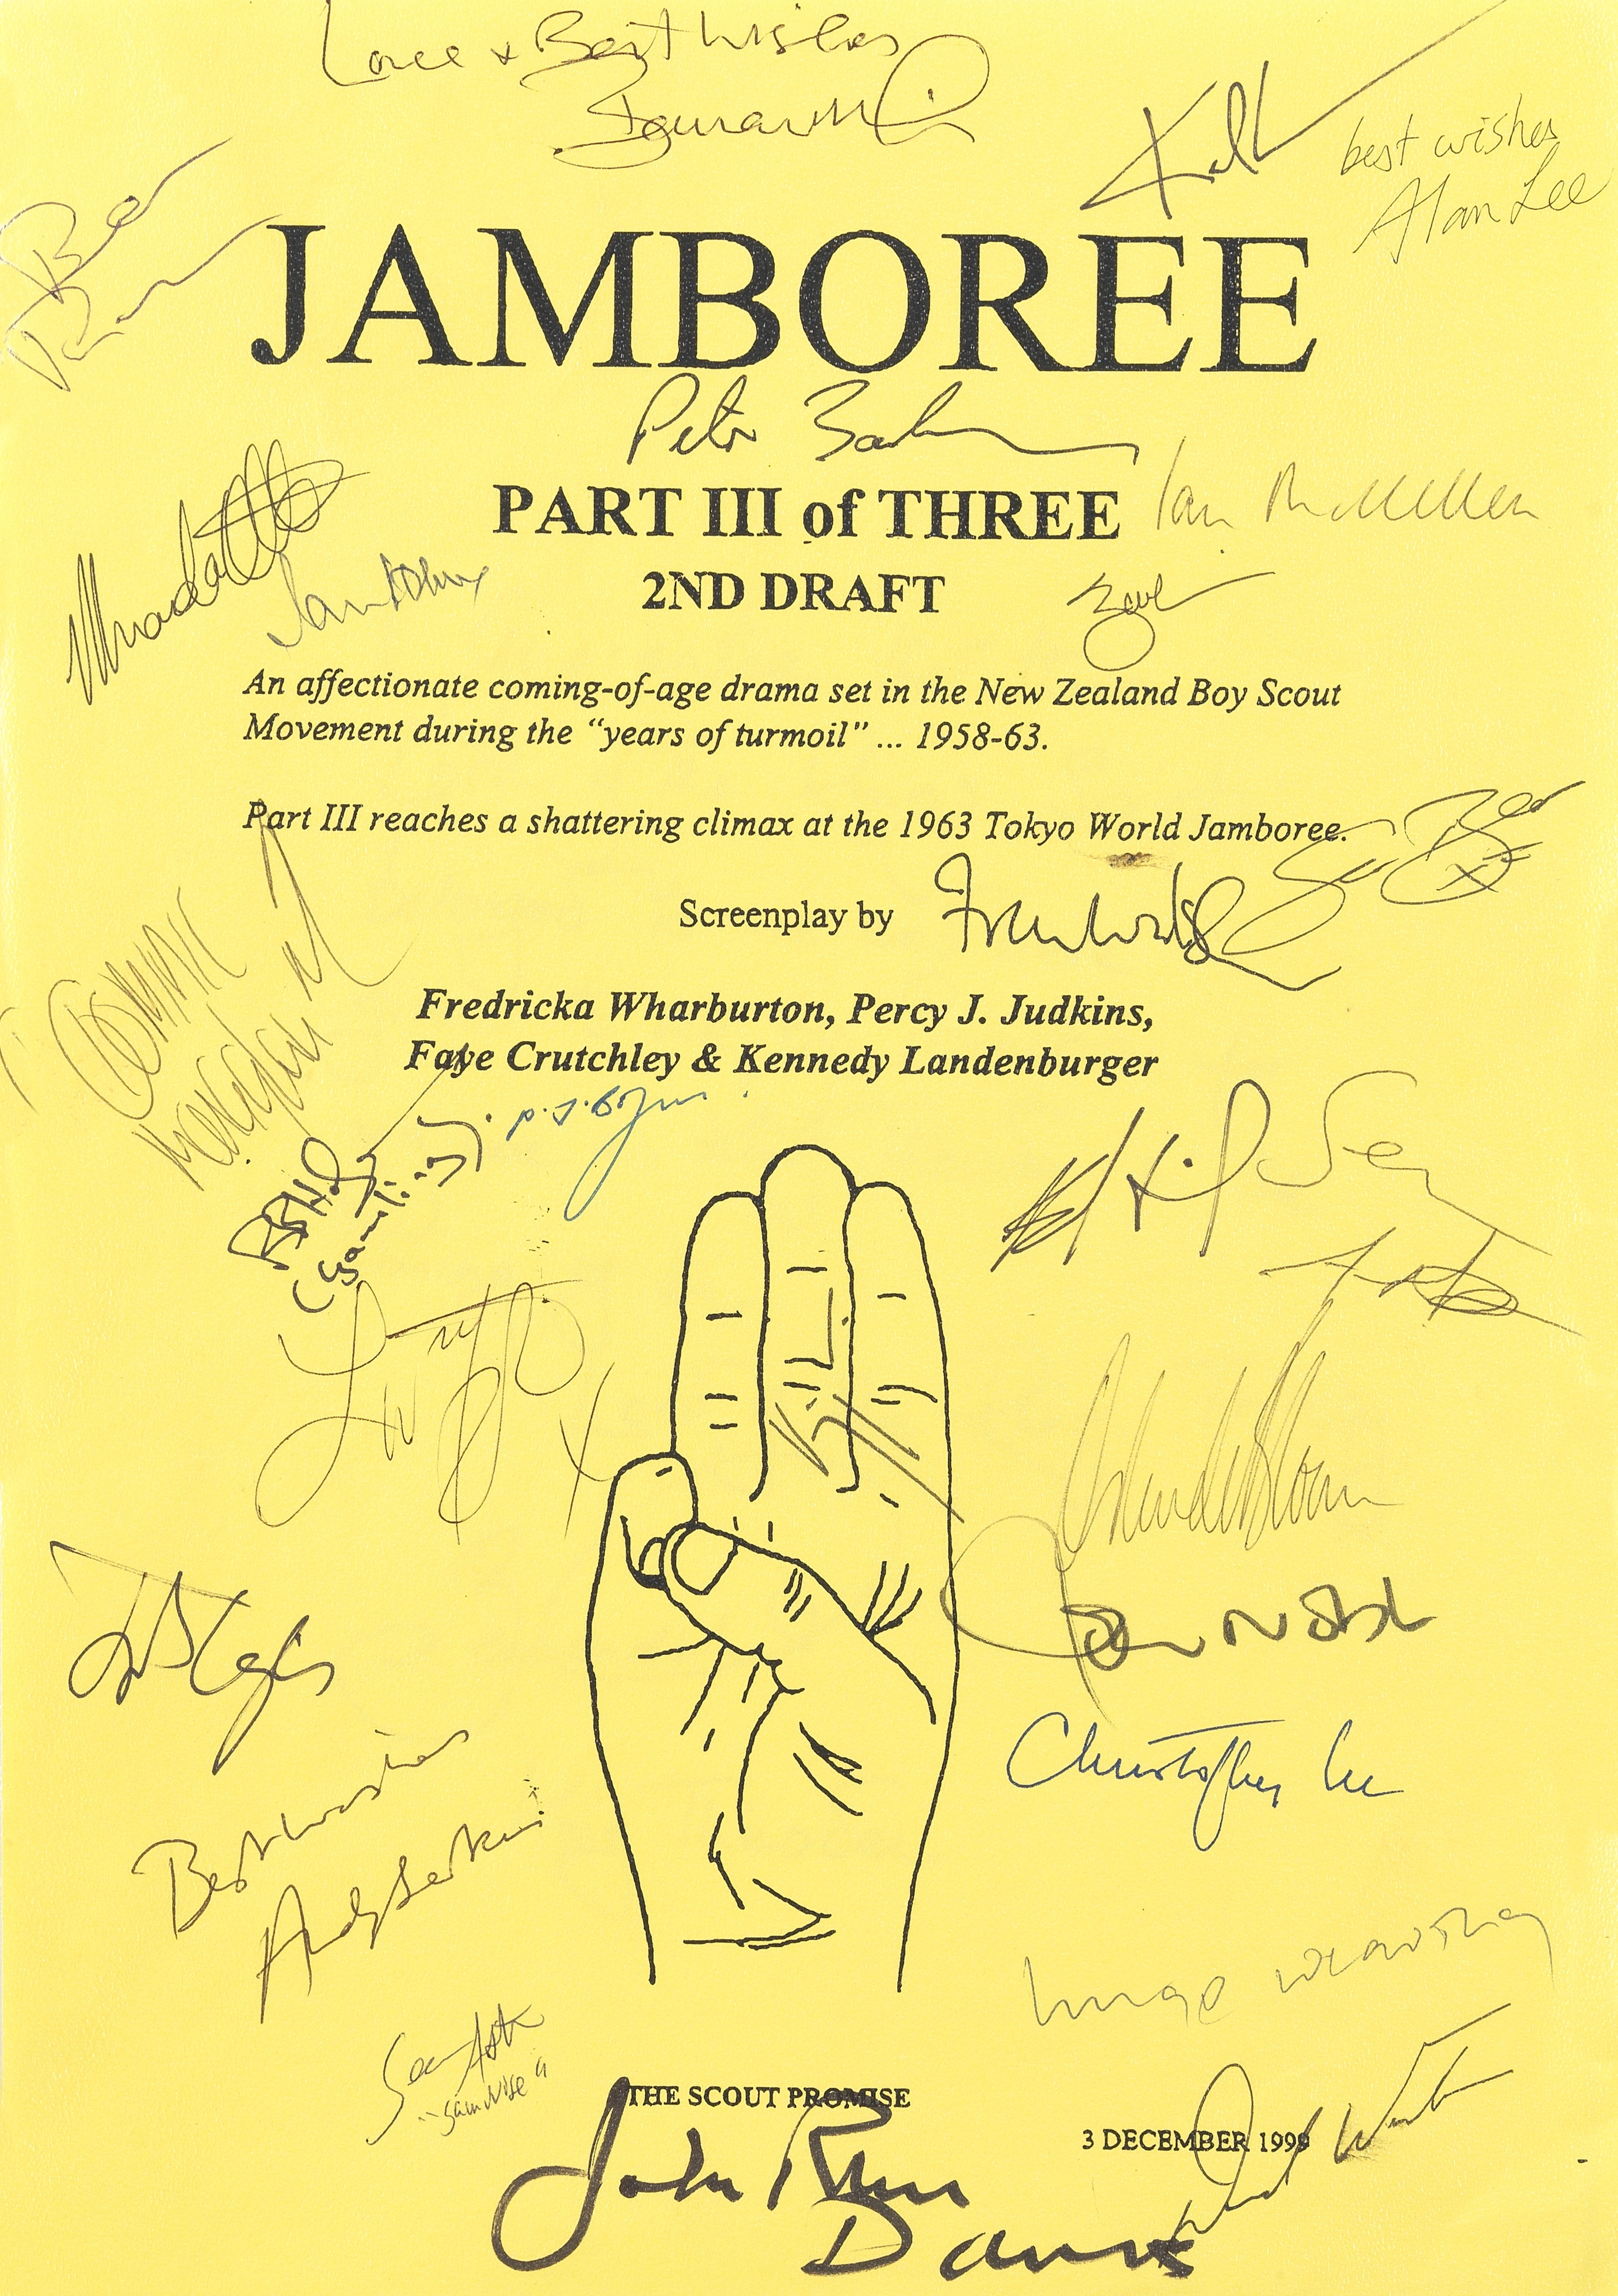 The Lord Of The Rings: Three original screenplay scripts for 'Jamboree' (Lord Of The Rings) signe...